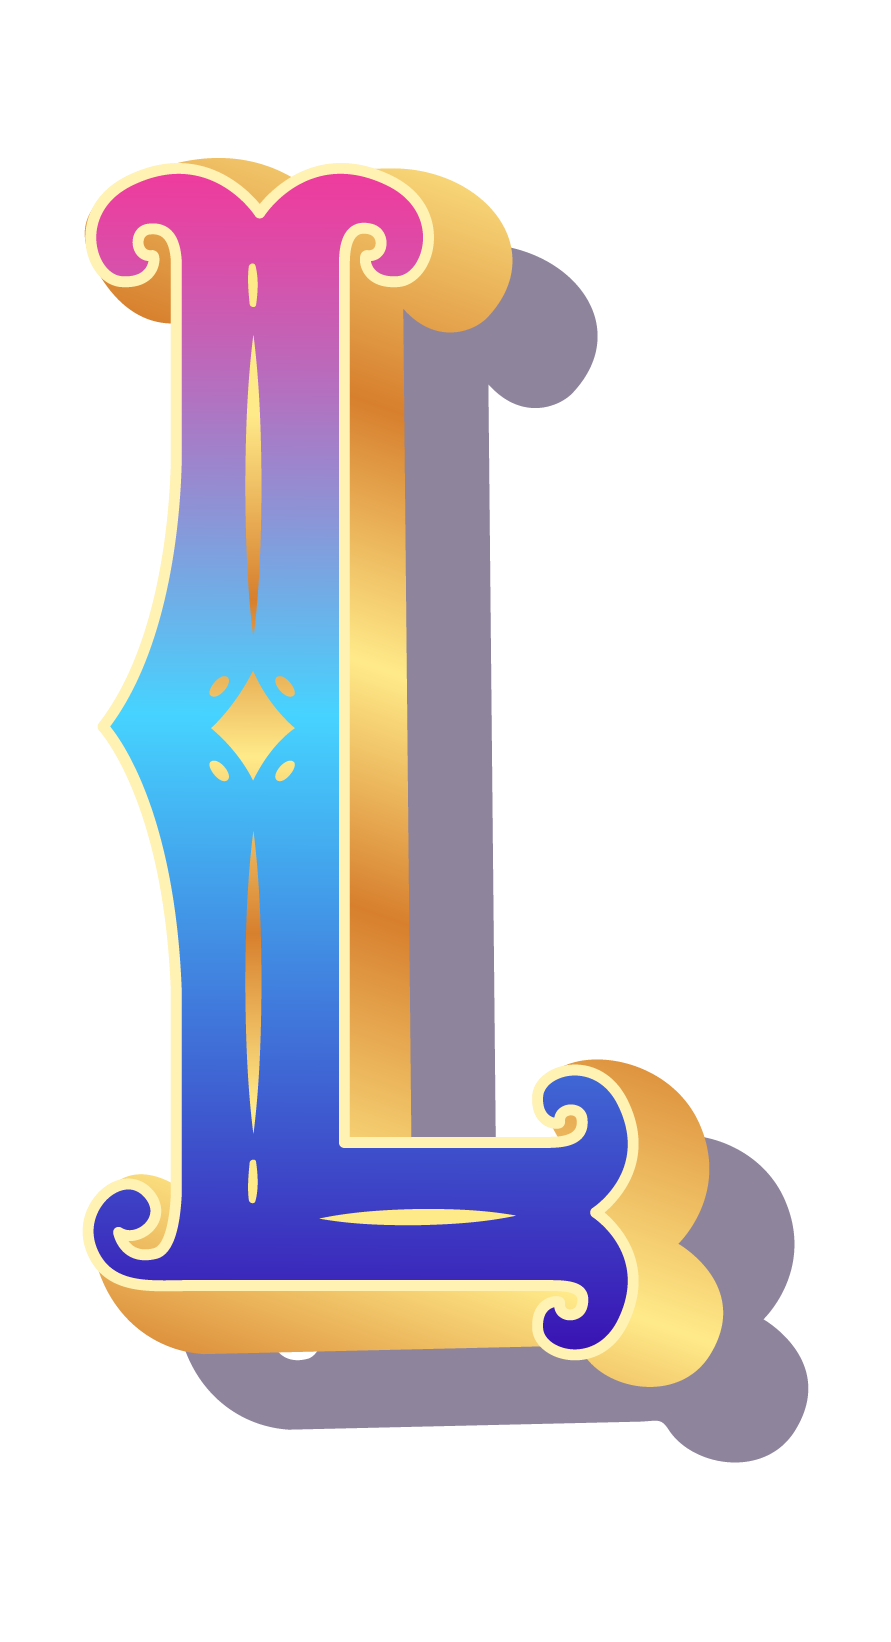 Letter L PNG HD Free Image